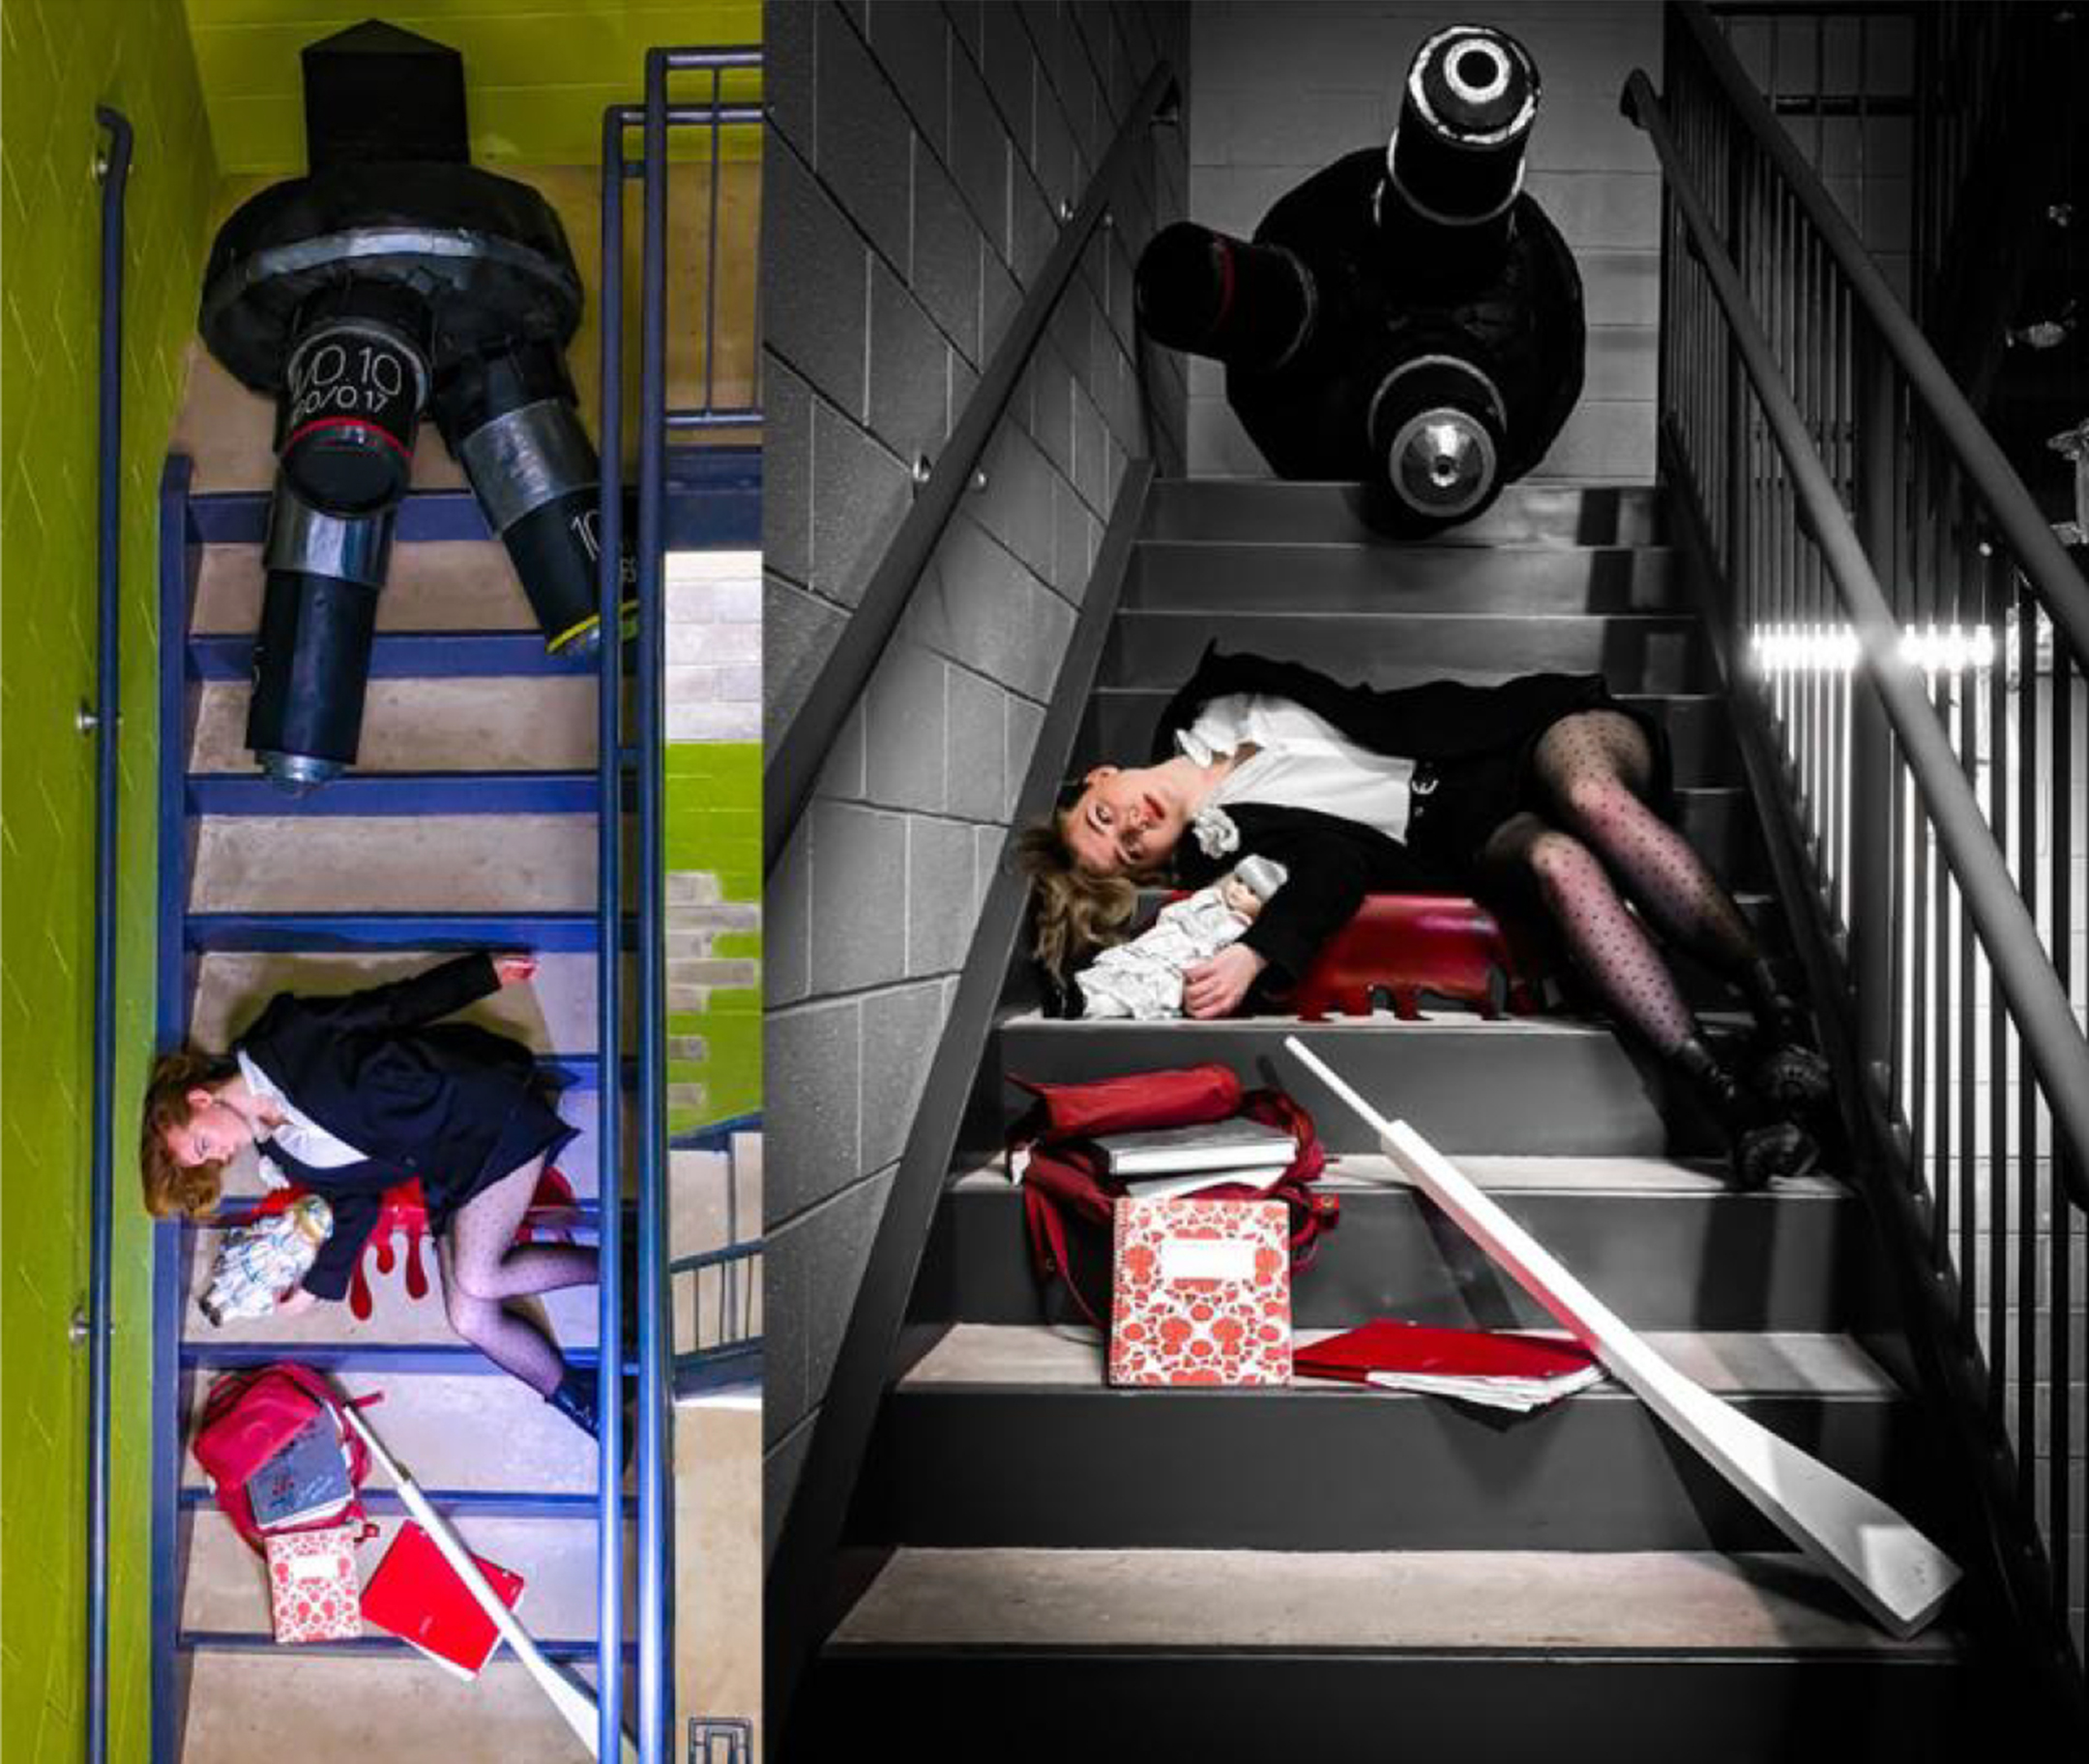 Two photos of a staged crime scene on an indoor staircase